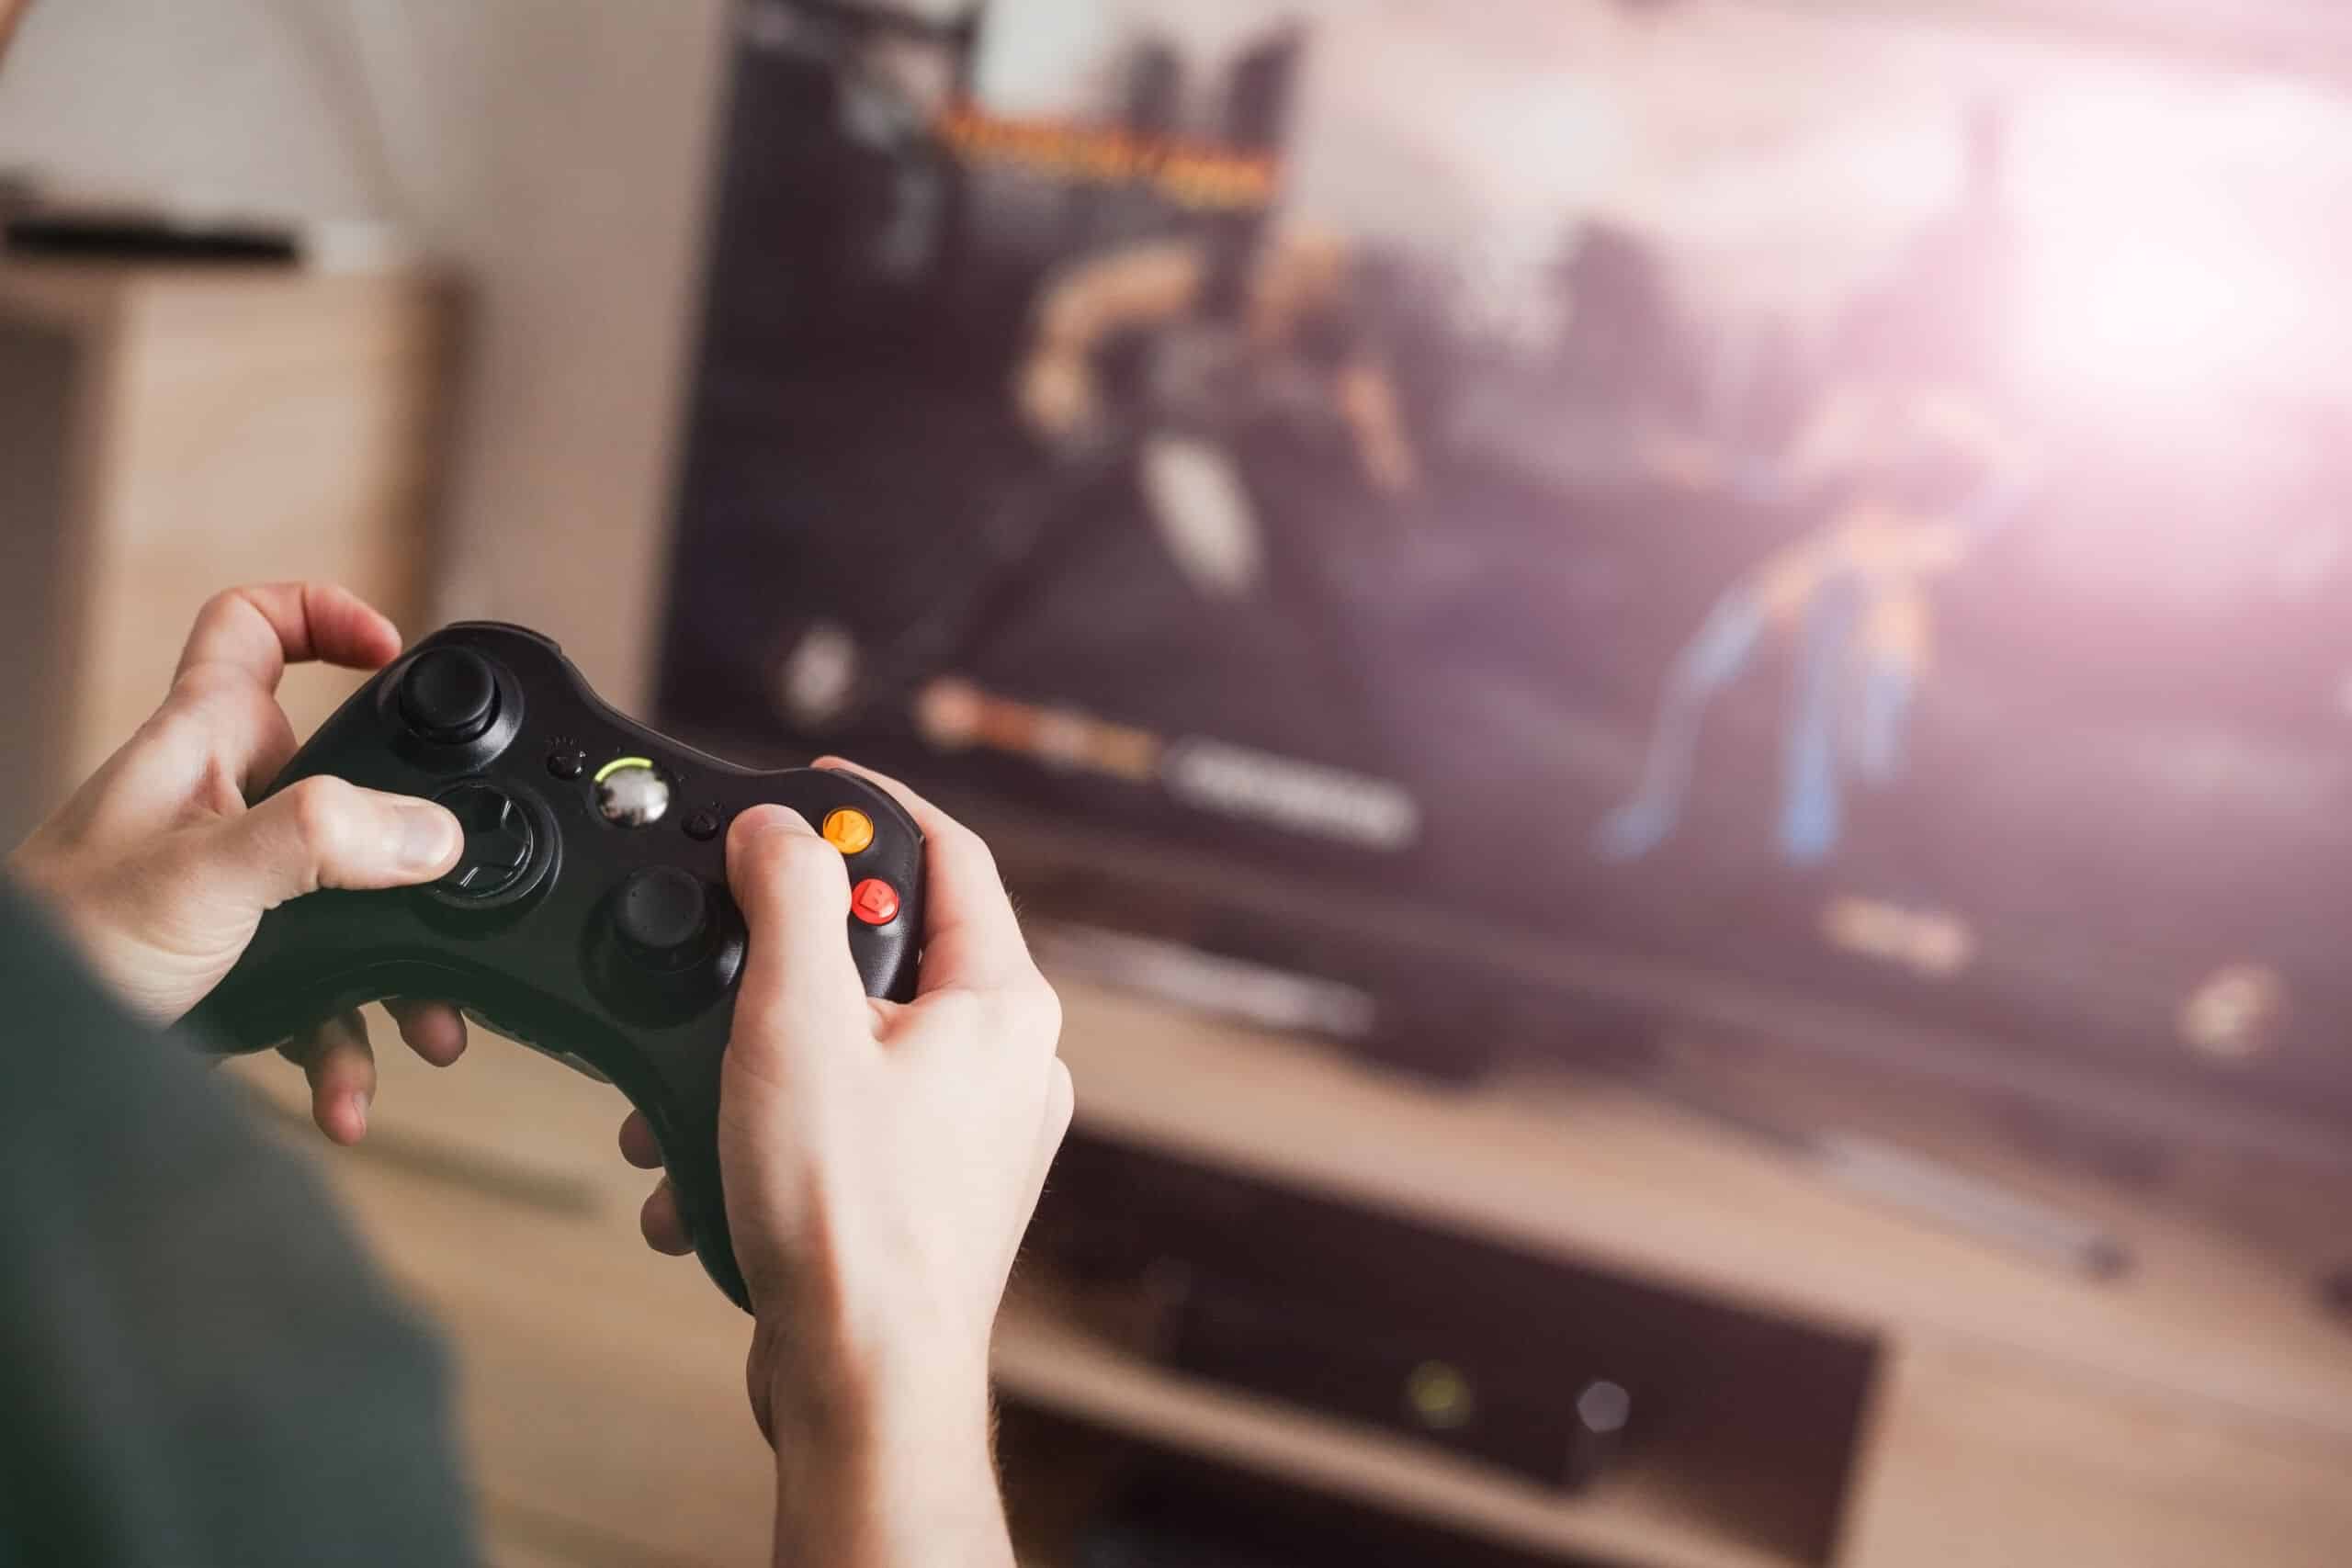 What Are the Signs of Video Game Addiction?